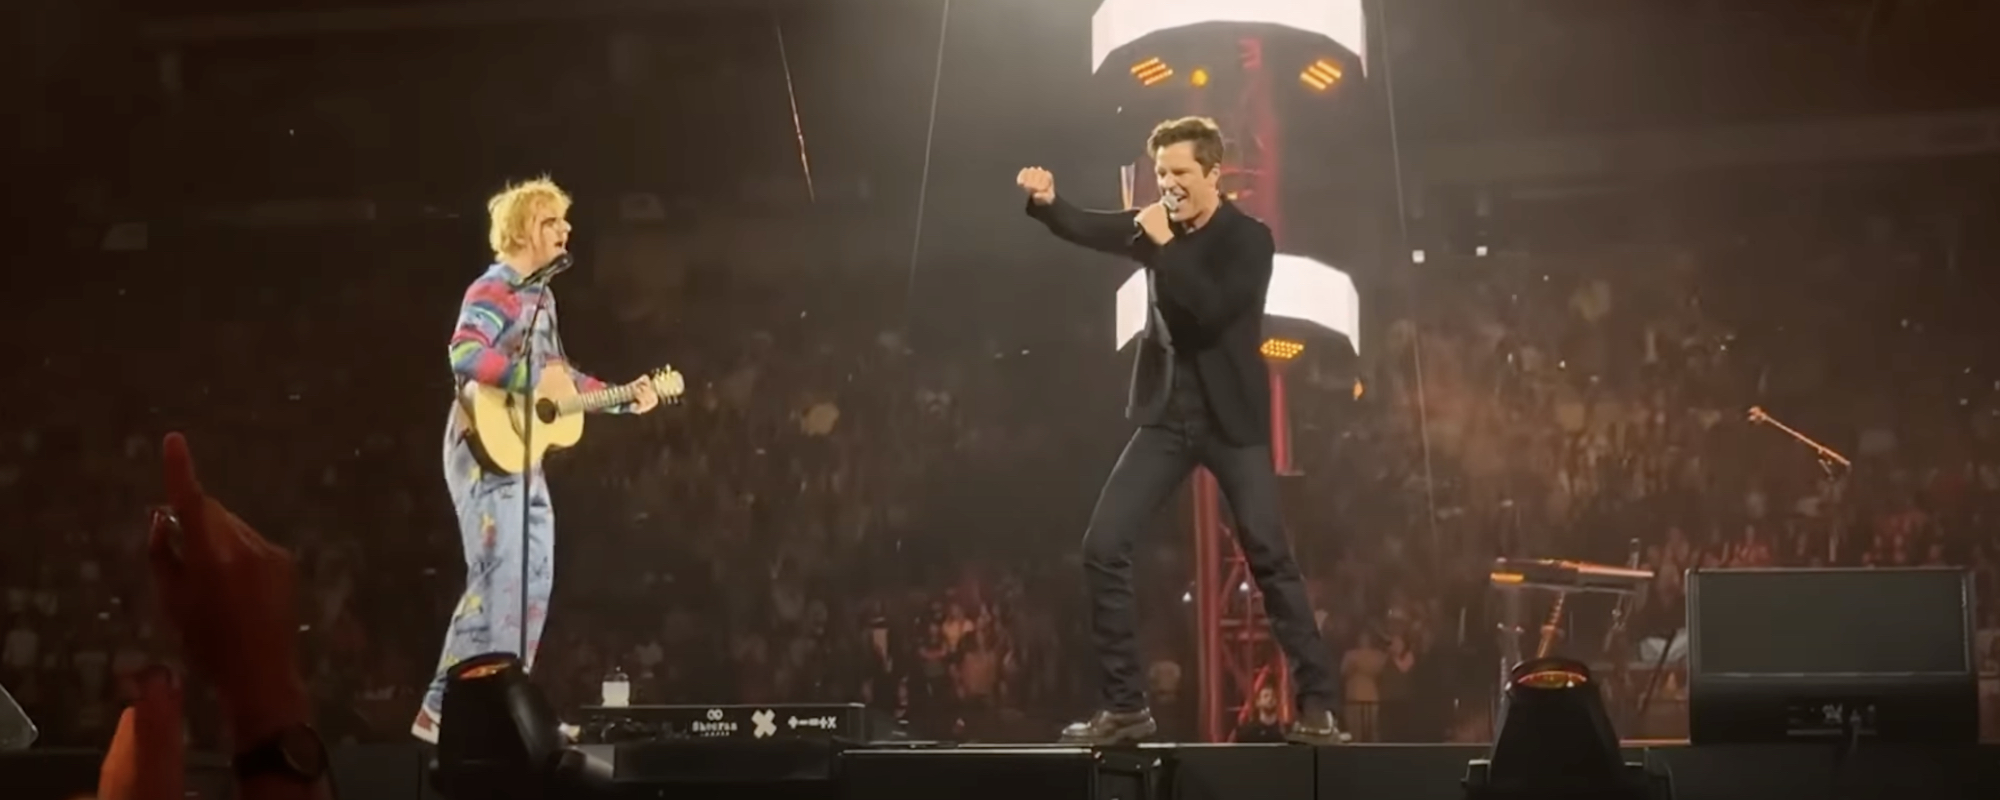 Watch: The Killers’ Brandon Flowers Joins Ed Sheeran for Surprise Collaboration In Las Vegas